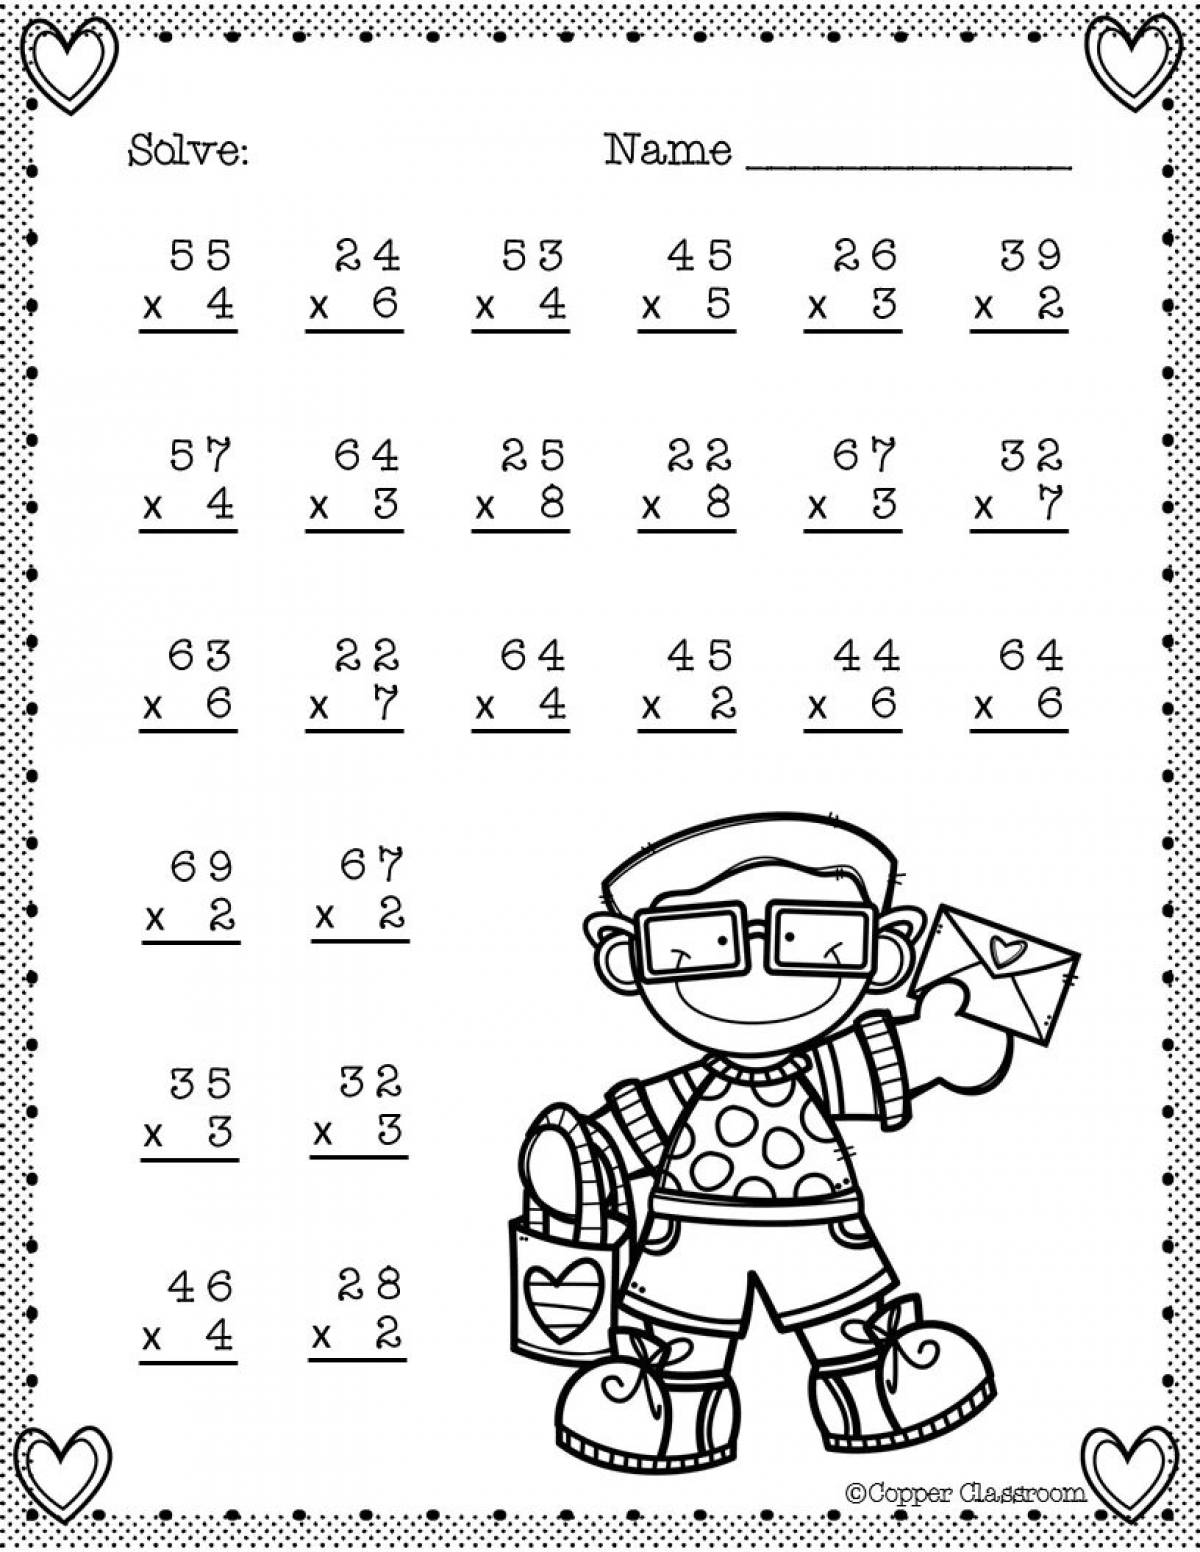 Iridescent multiplication table for 2 and 3 for grade 2